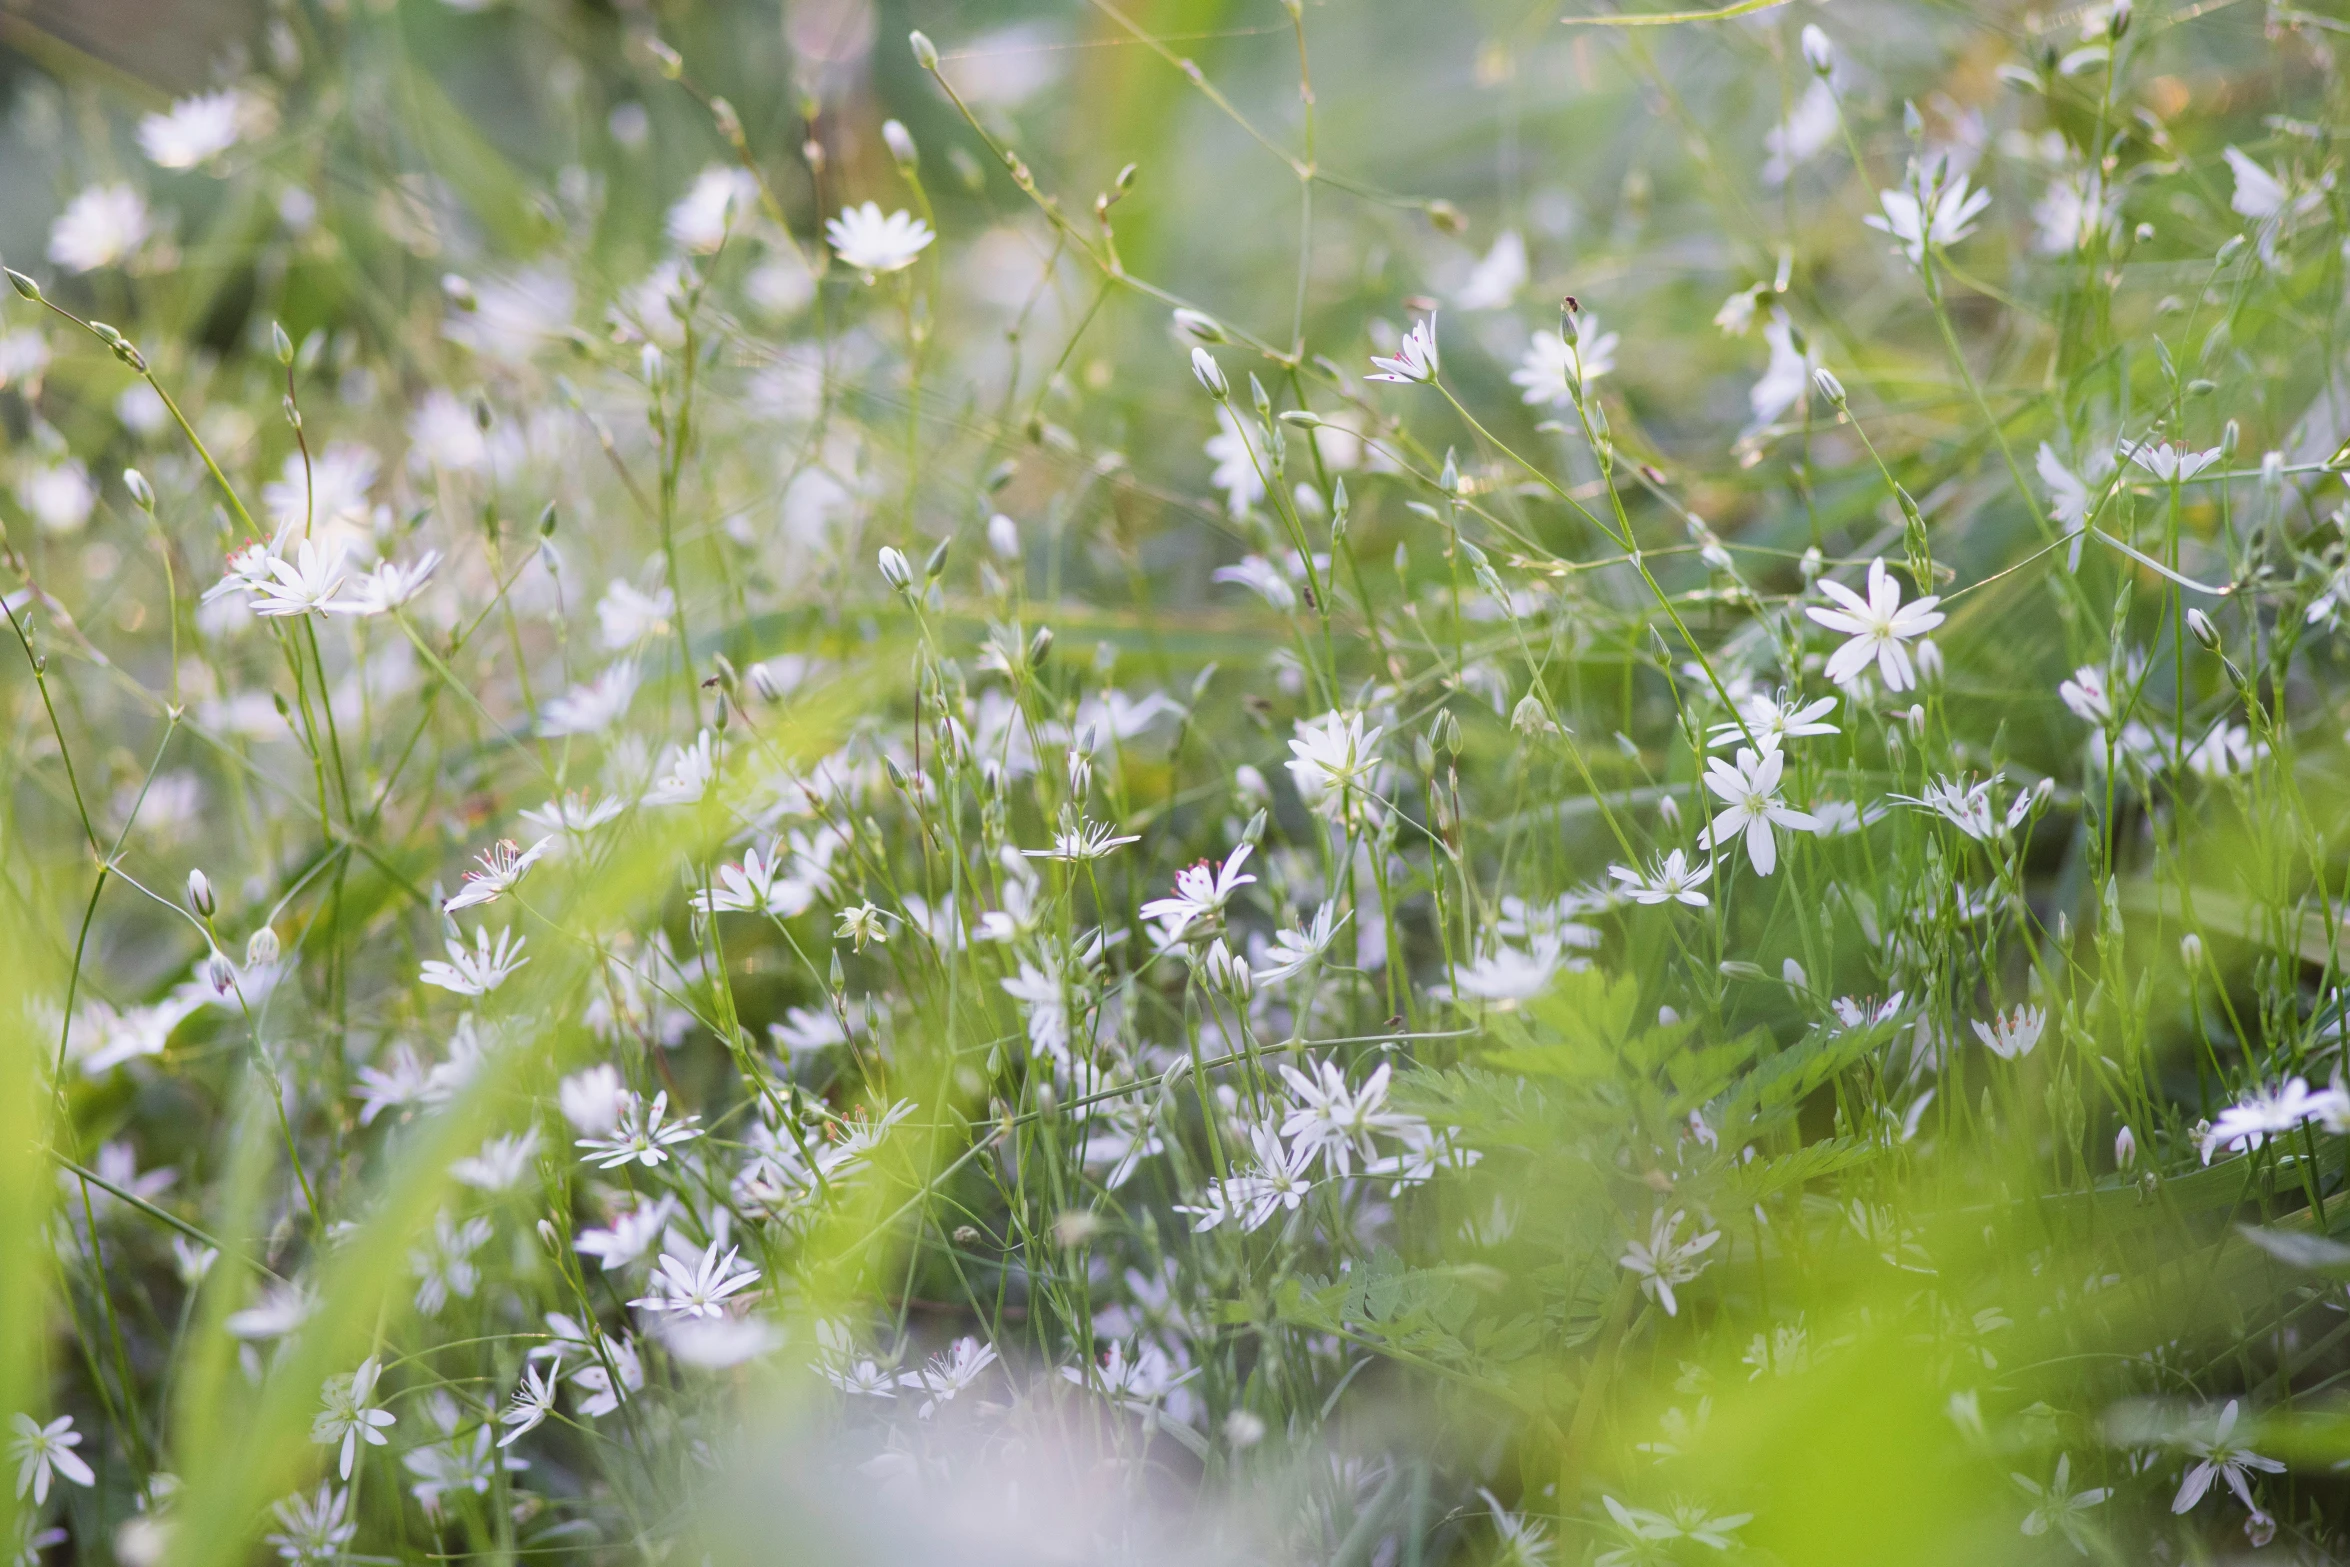 blurry pograph of white daisies growing in the wild